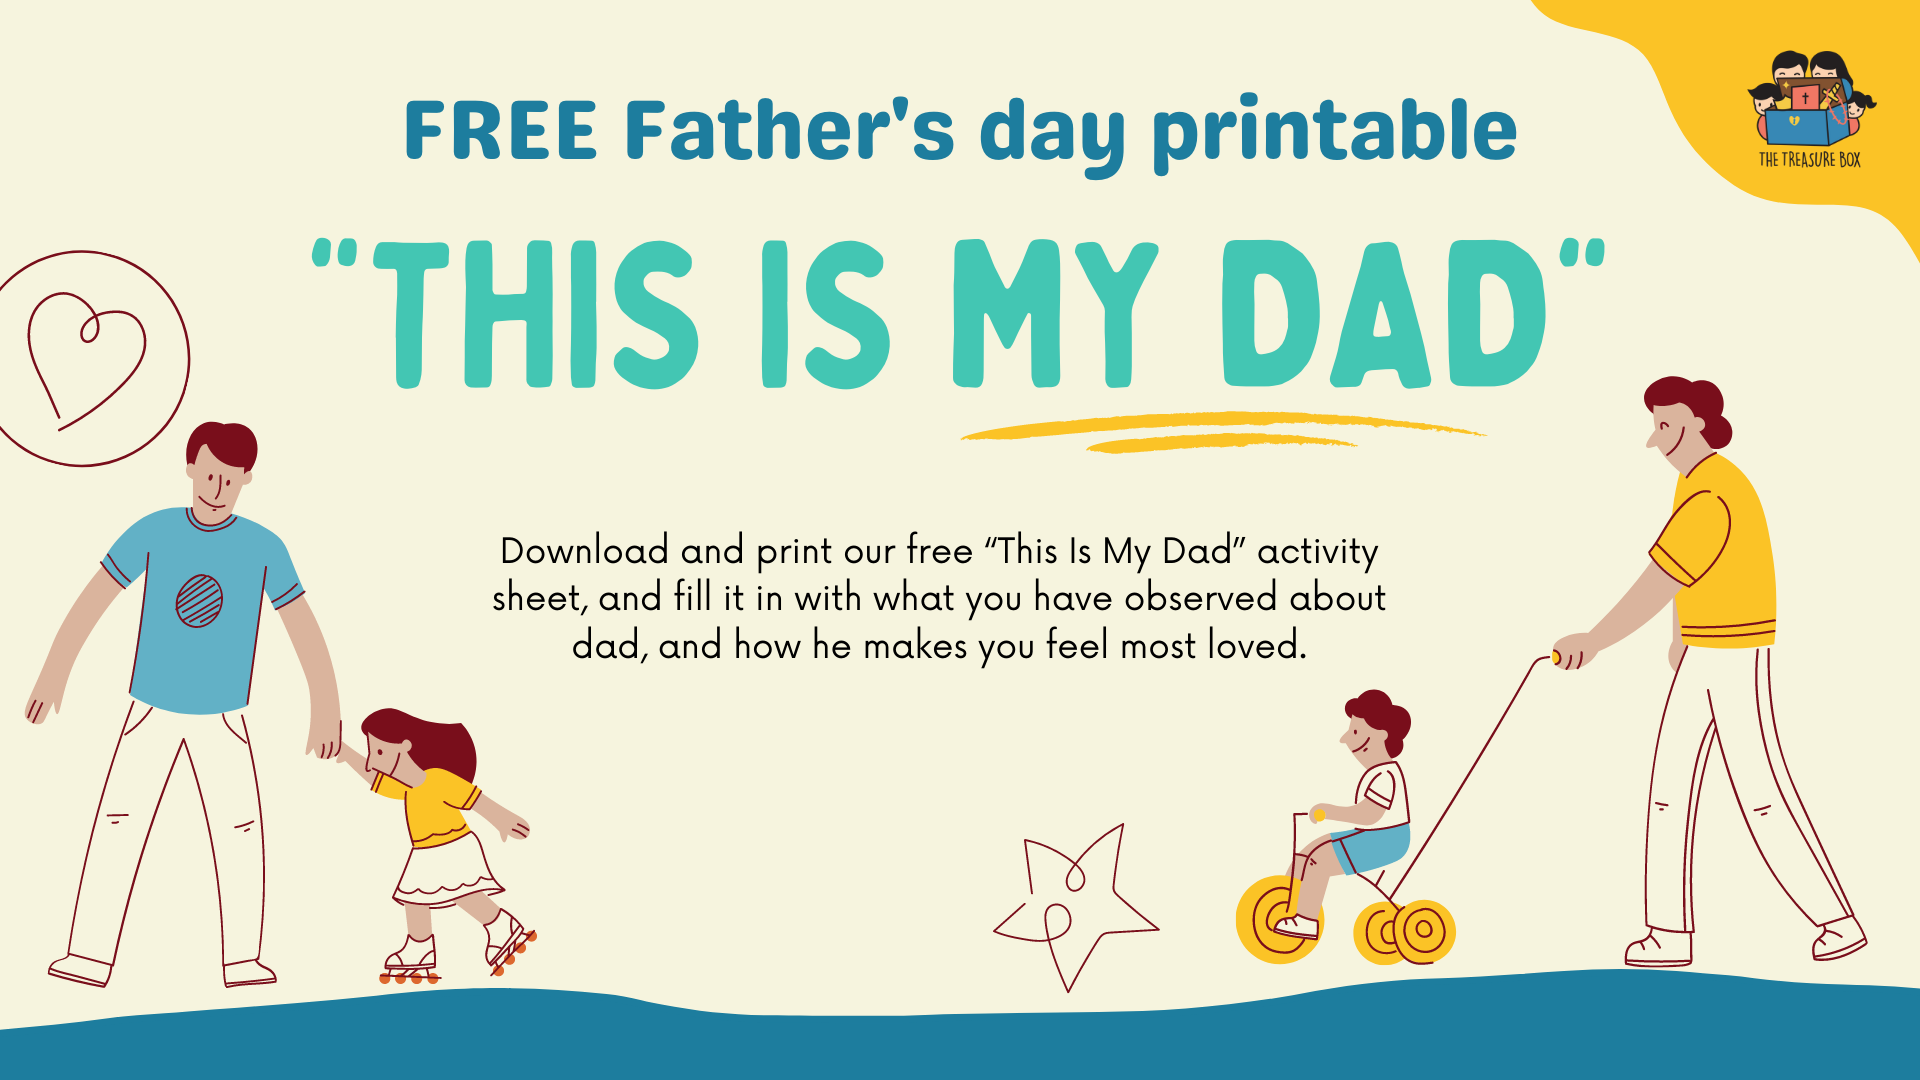 Free Fathers Day Printable This Is My Dad The Treasure Box Sg